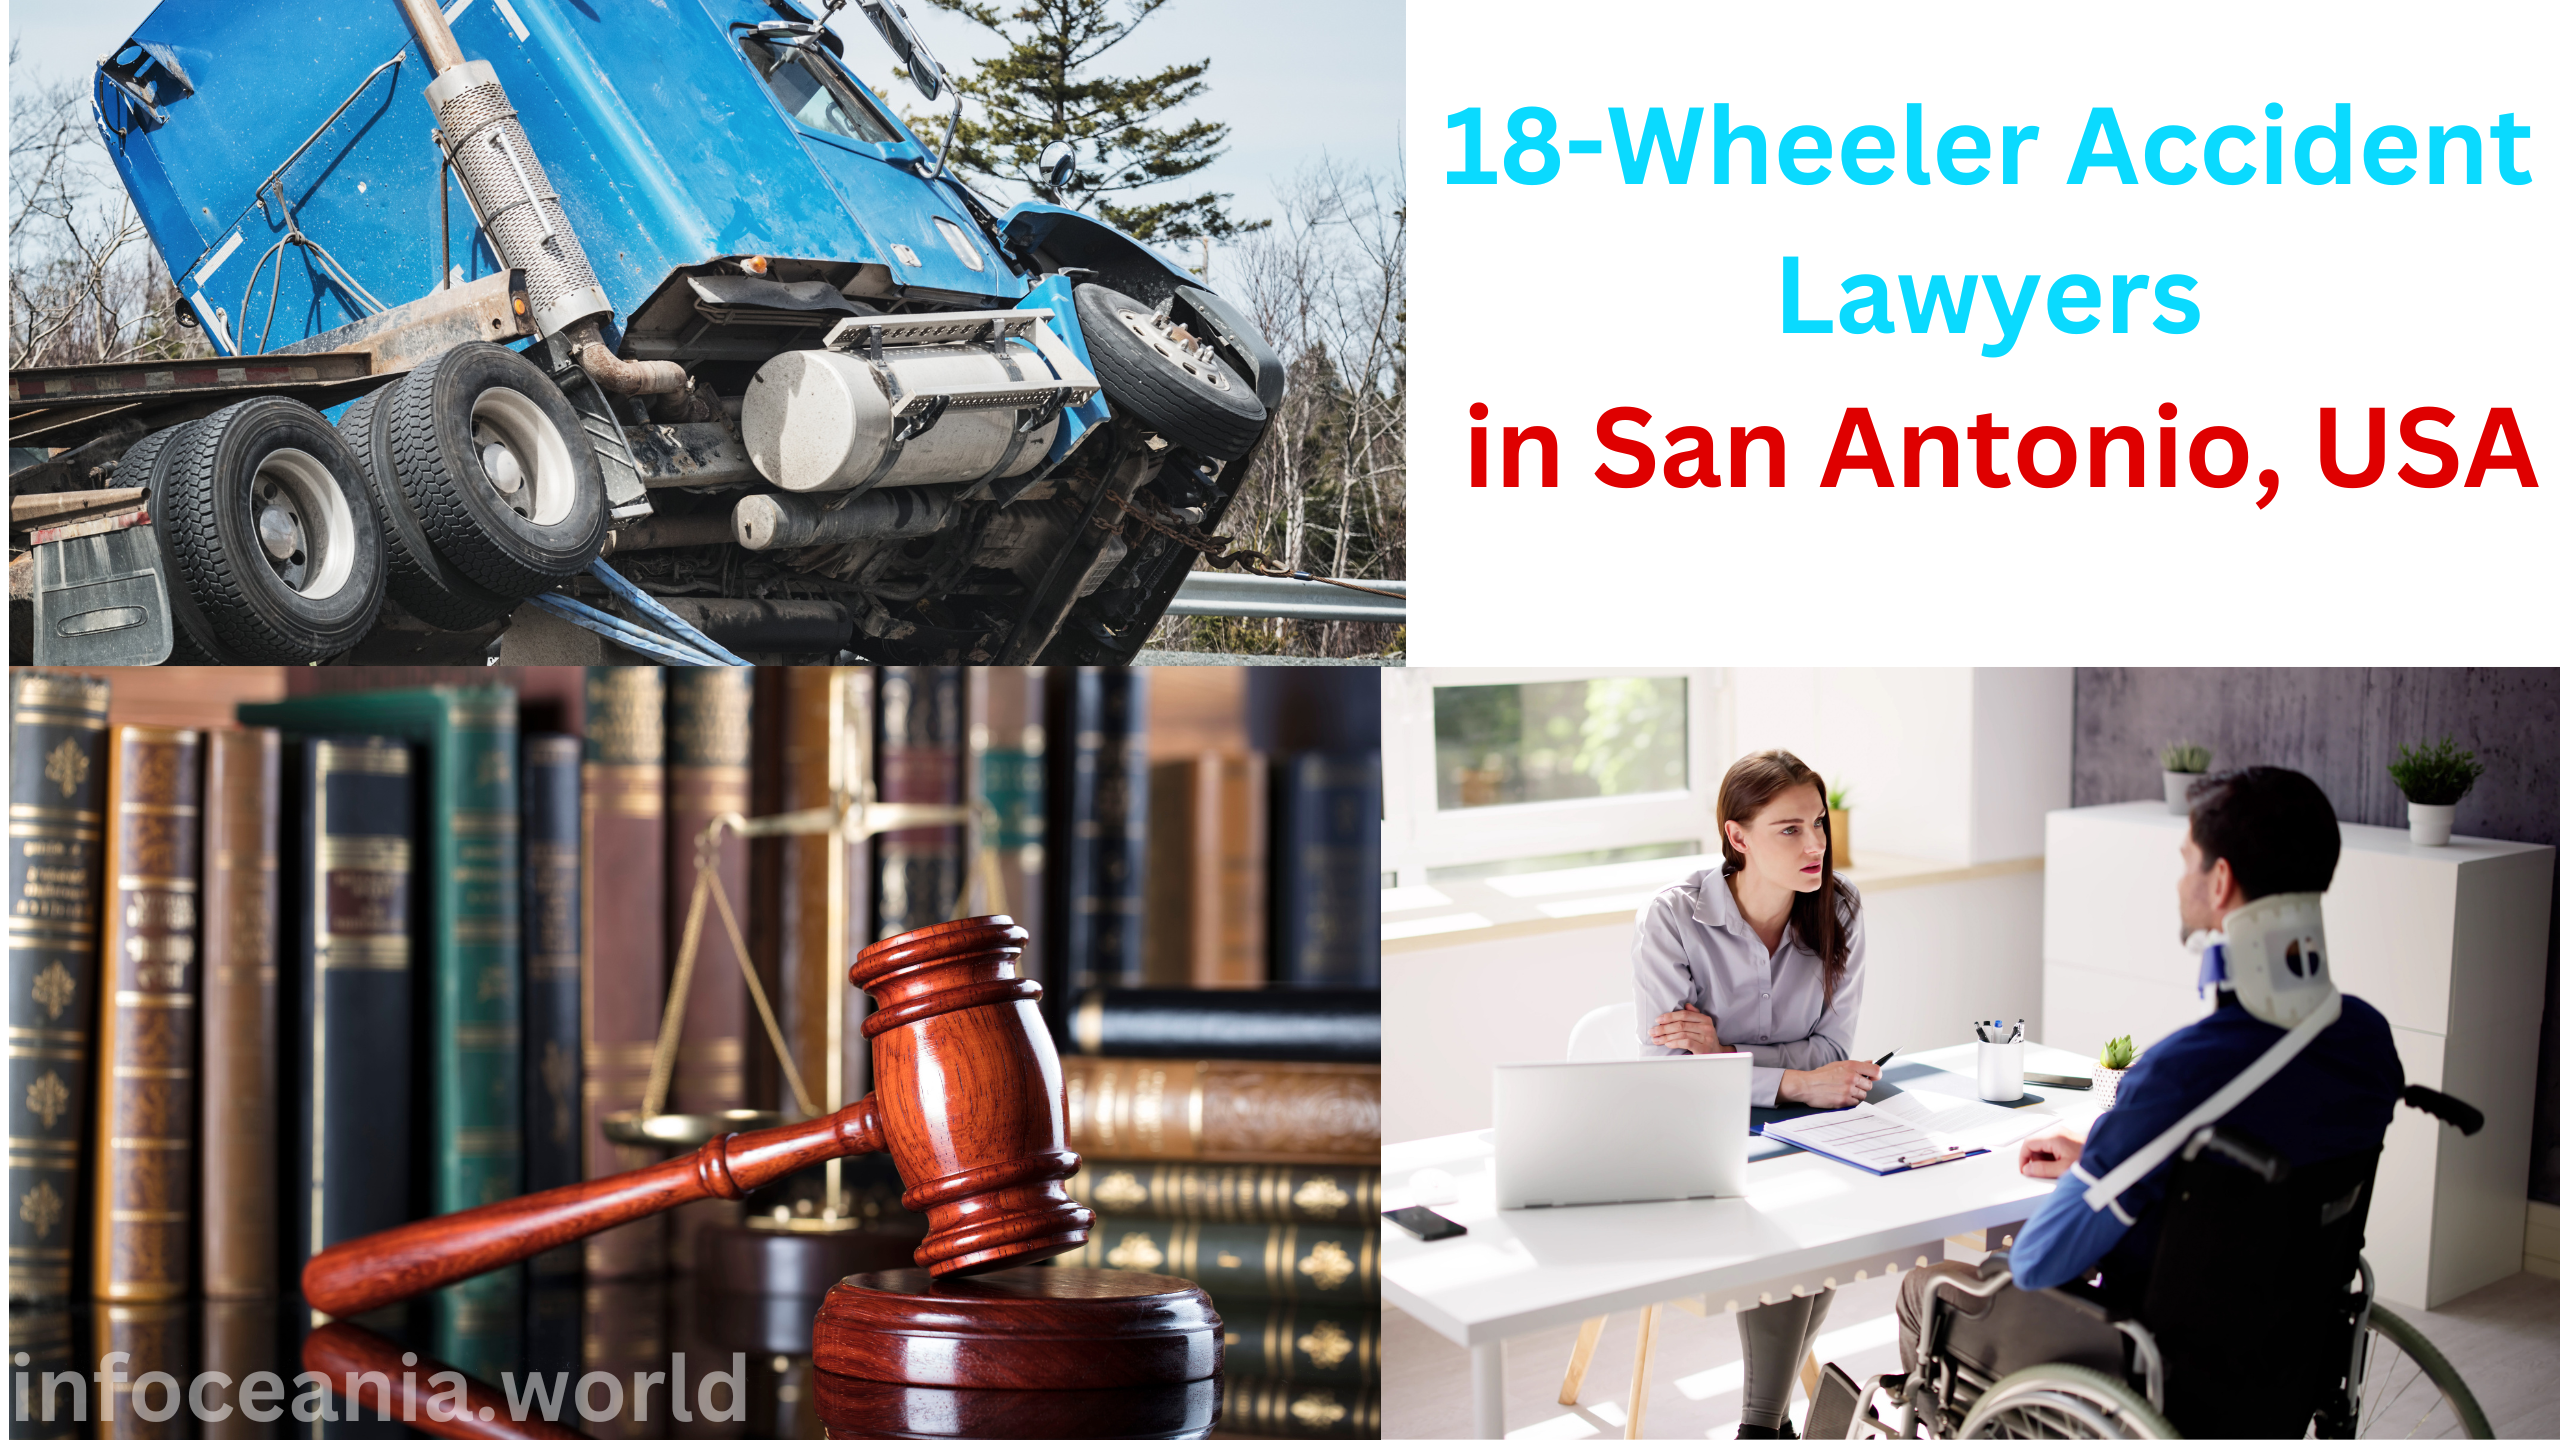 Role of 18-Wheeler Accident Lawyers in San Antonio, USA